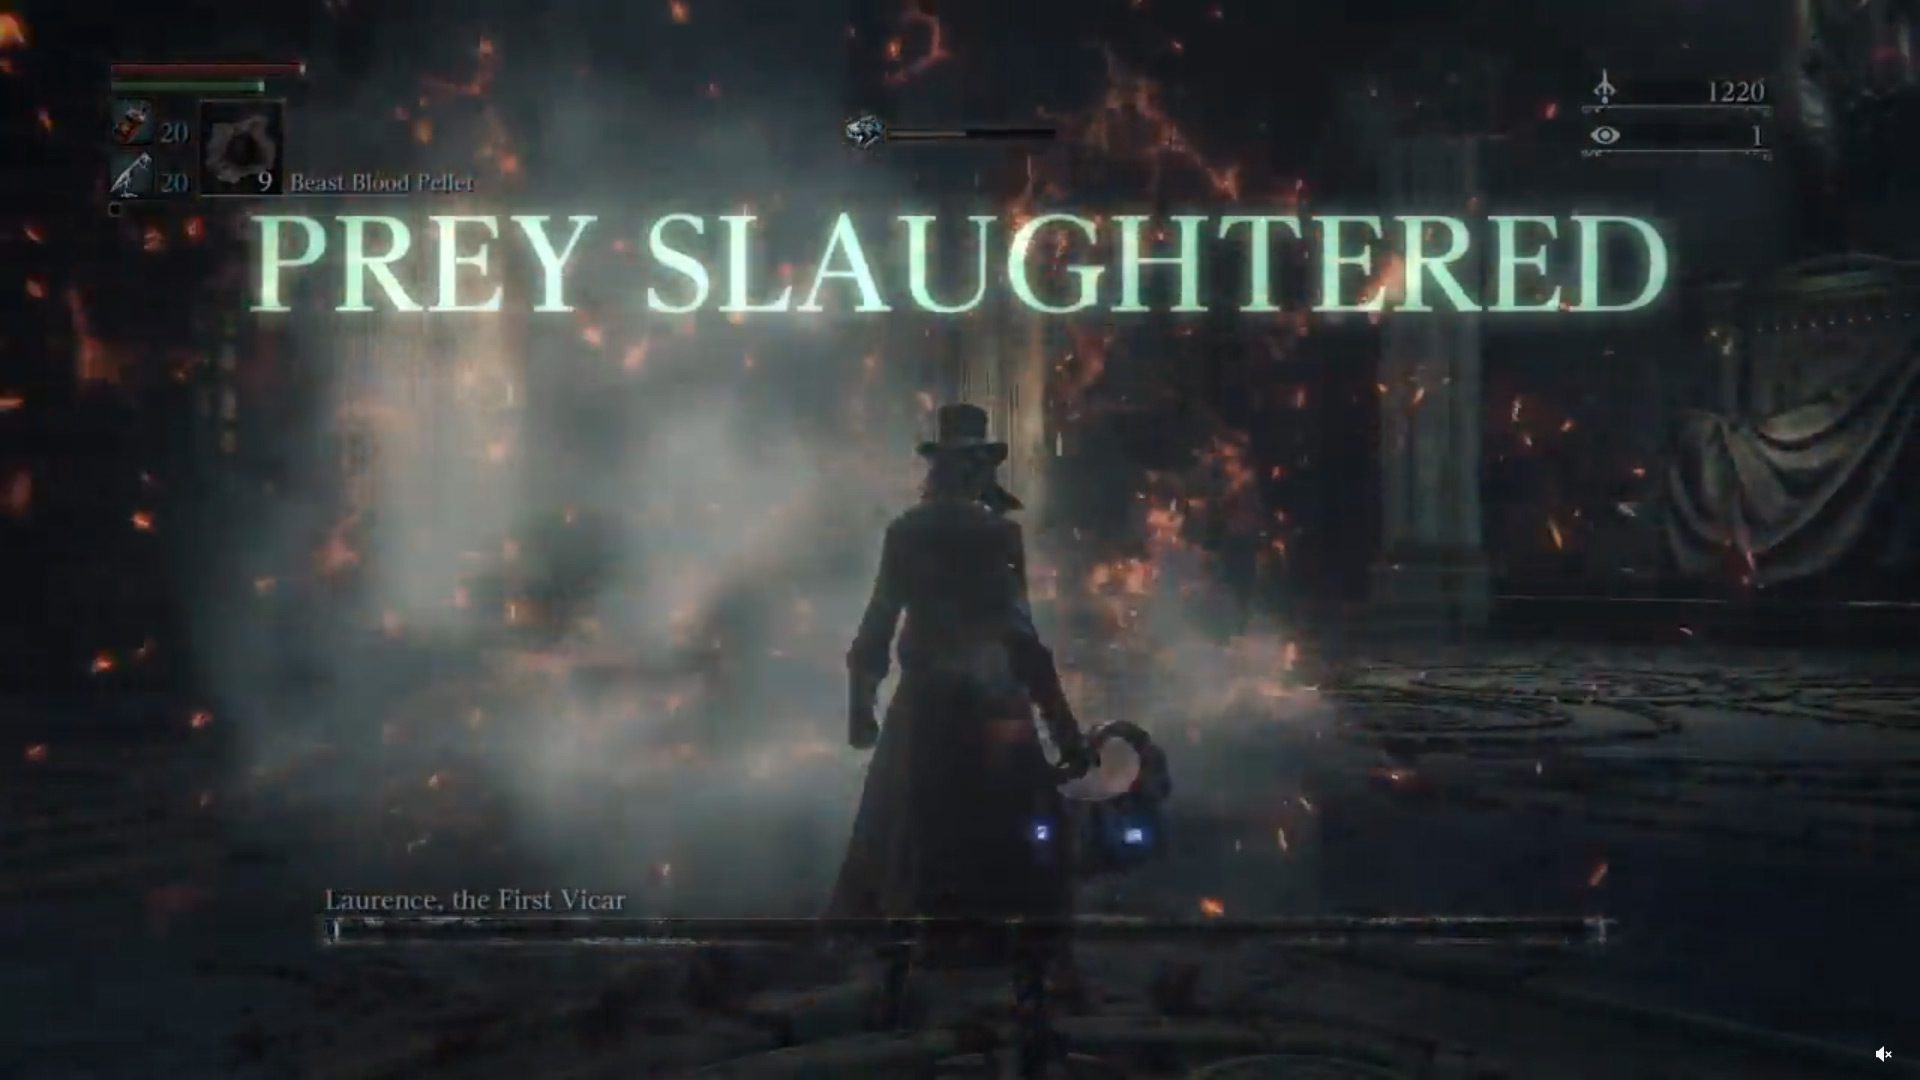 The best-feeling "Prey Slaughtered" message in Bloodborne